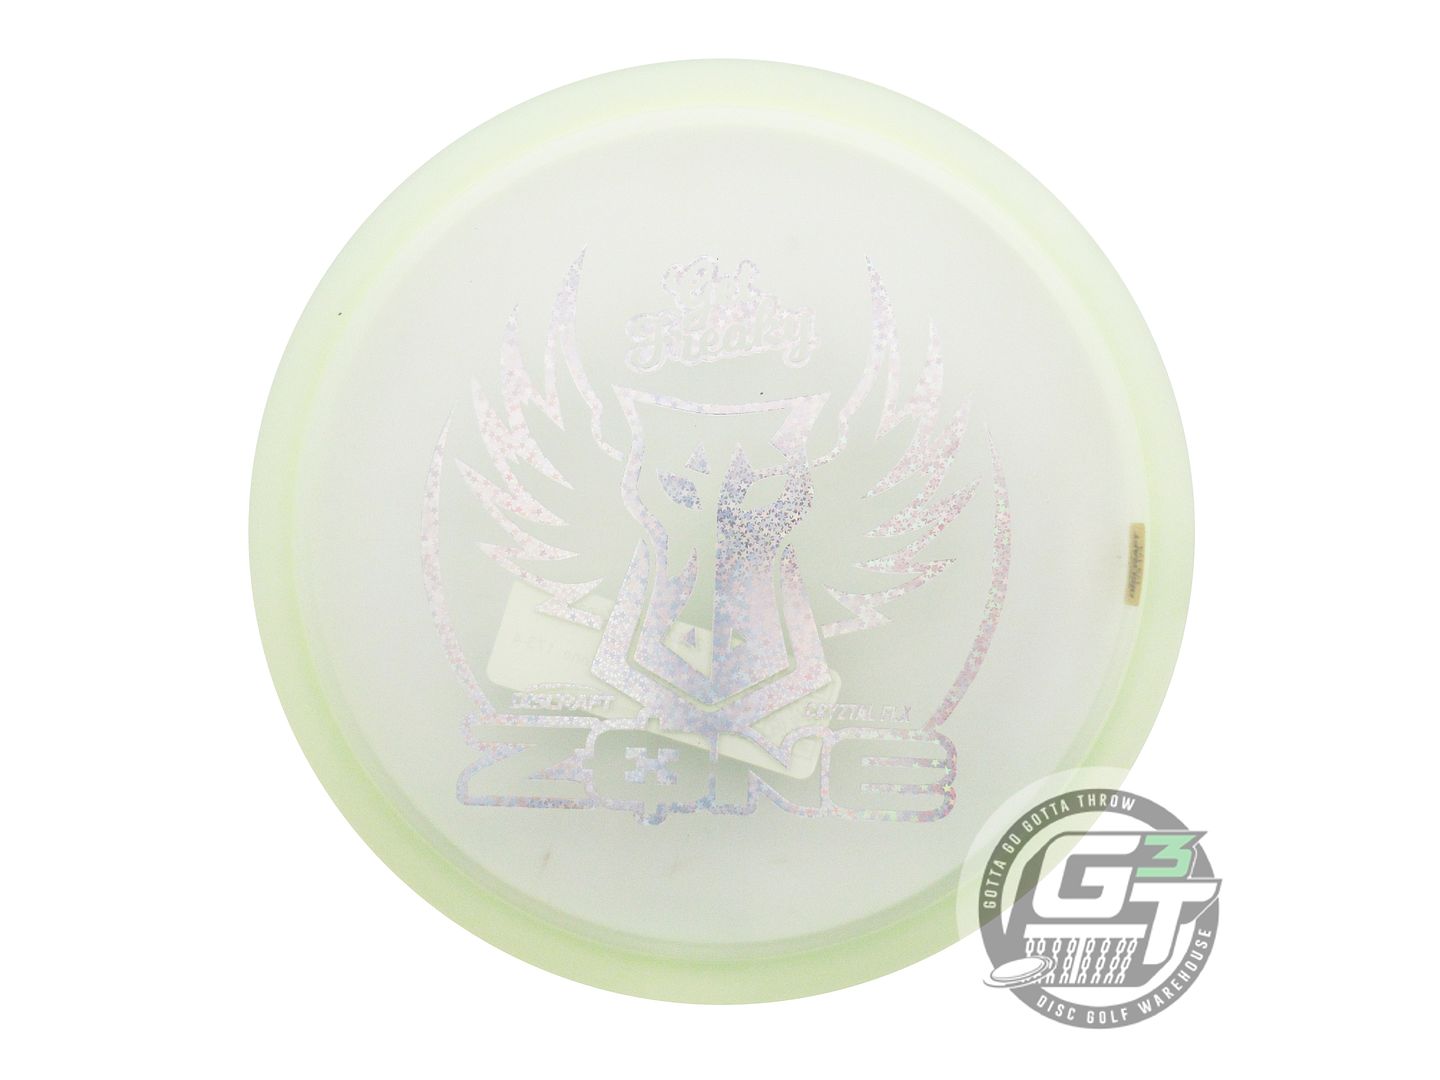 Discraft Limited Edition 2023 Brodie Smith Get Freaky CryZtal Z FLX Zone Putter Golf Disc (Individually Listed)